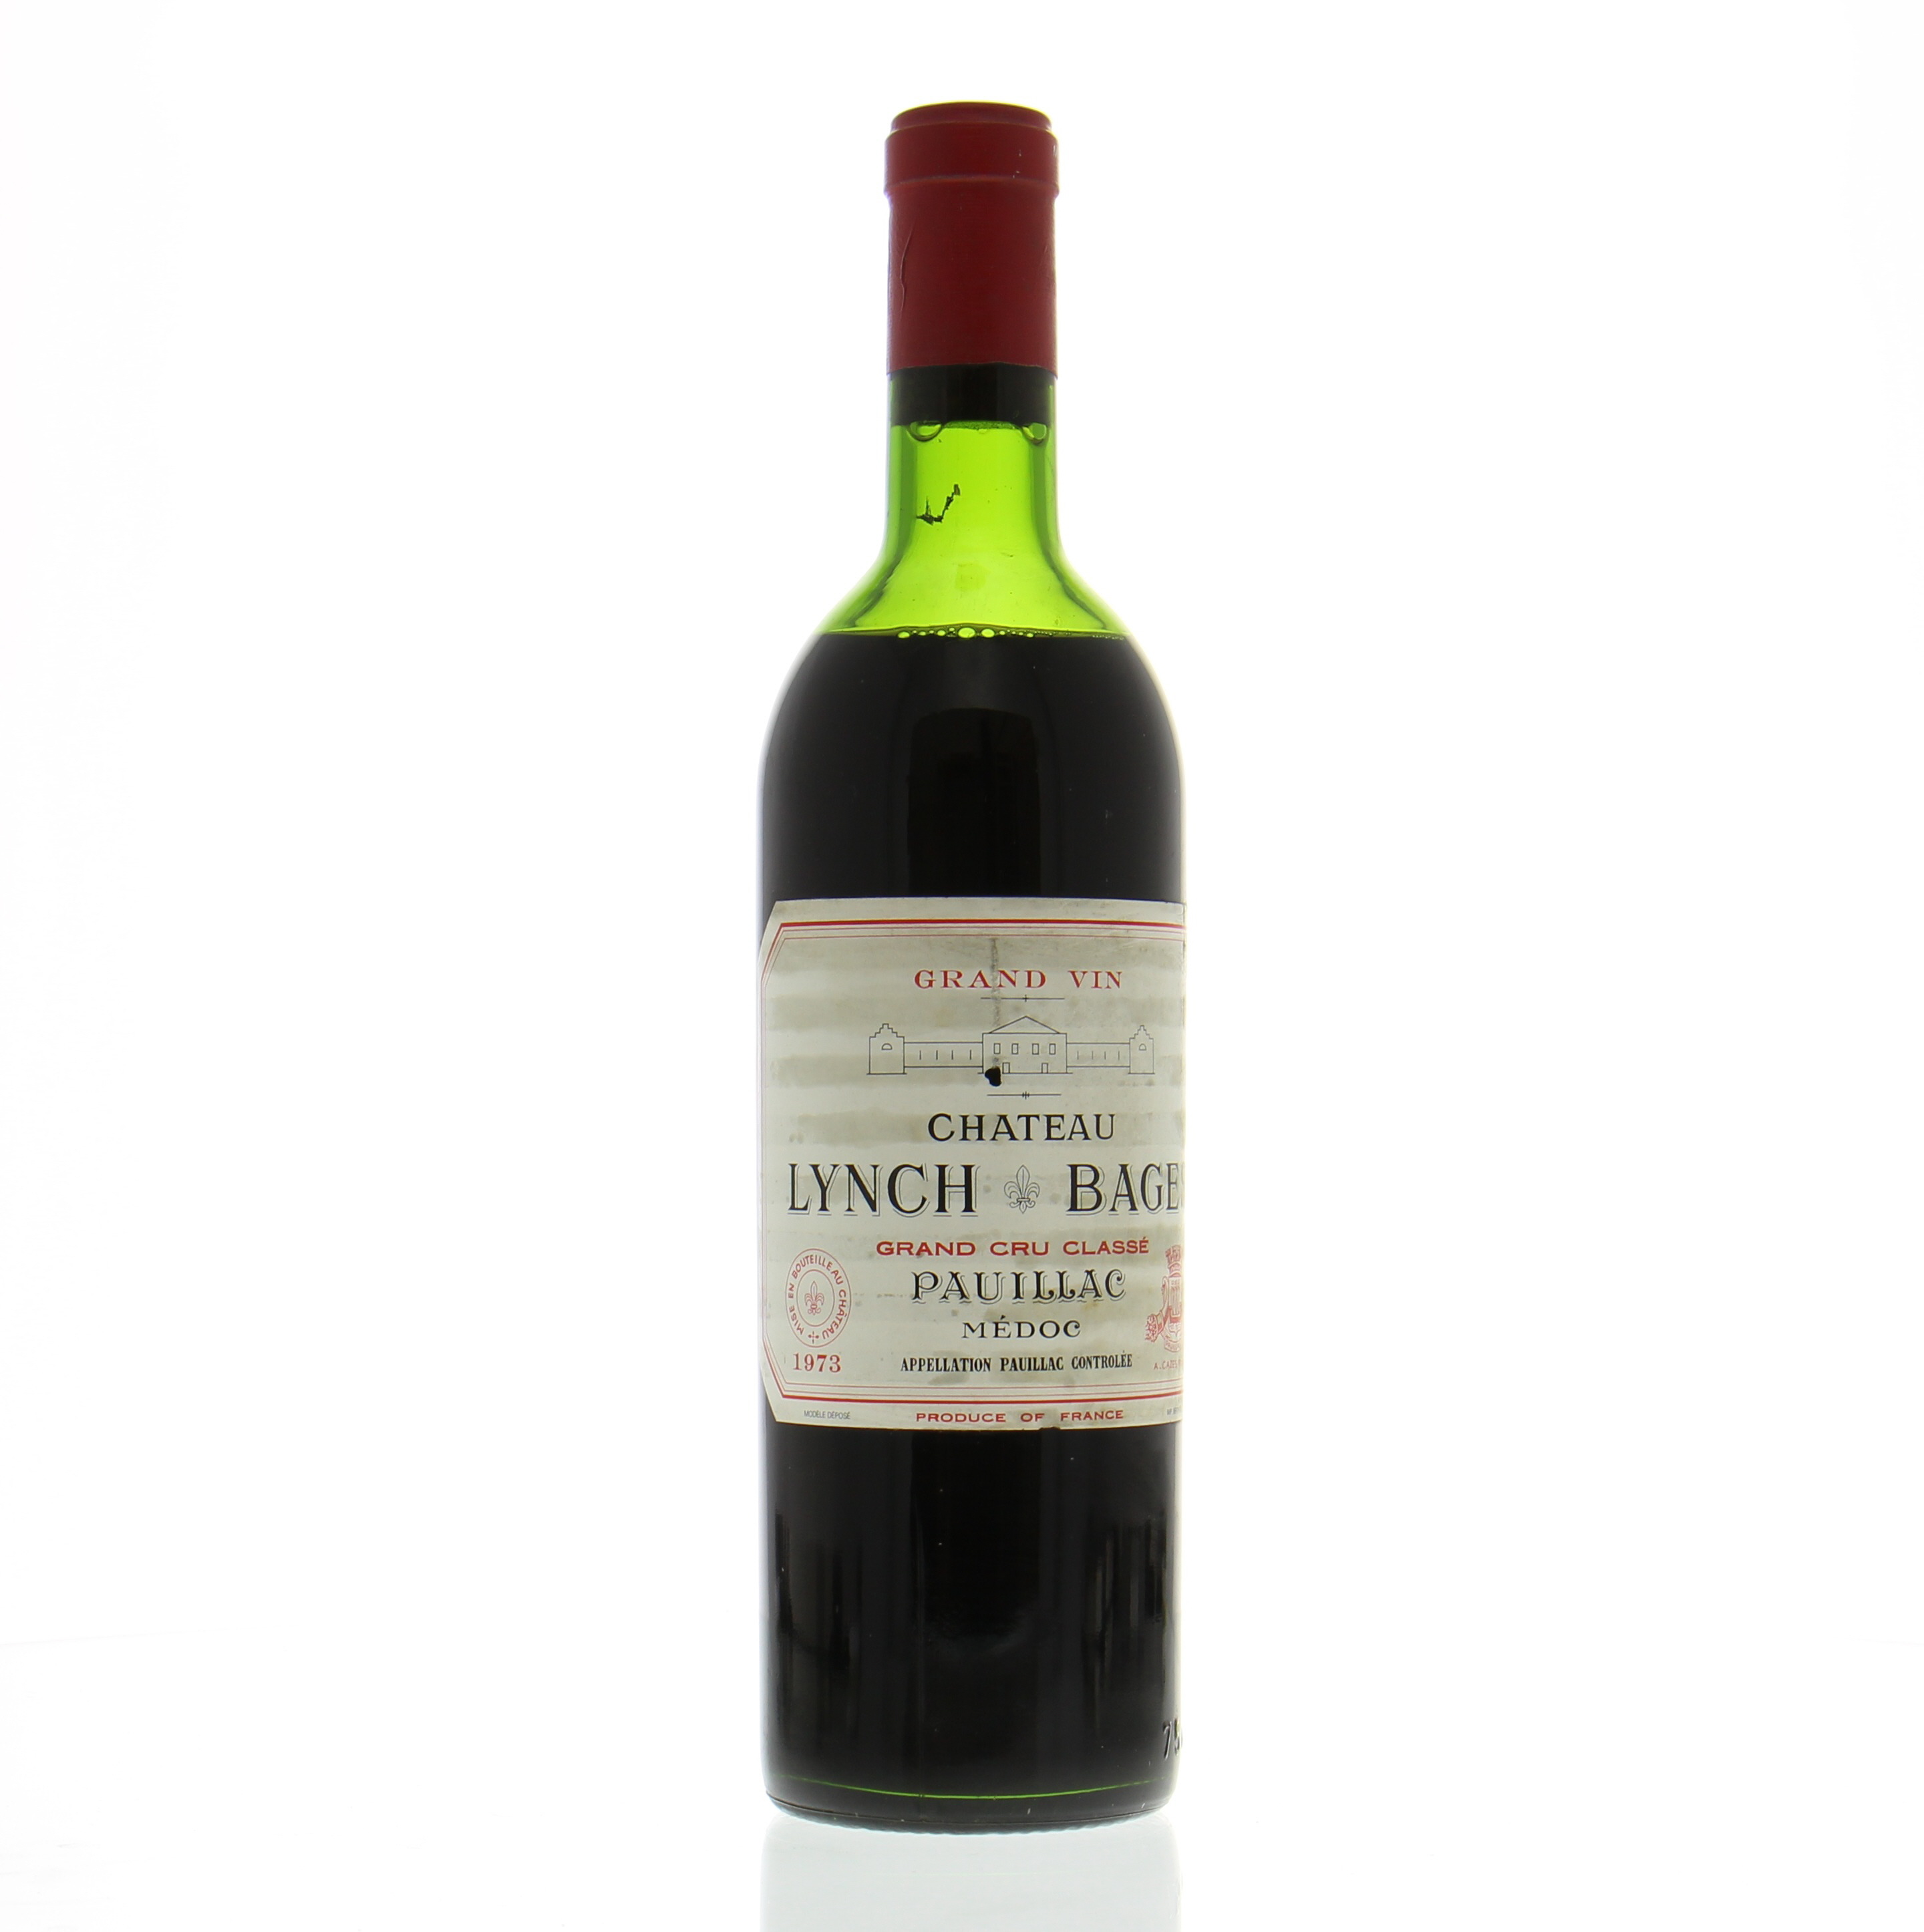 Chateau Lynch Bages - Chateau Lynch Bages 1973